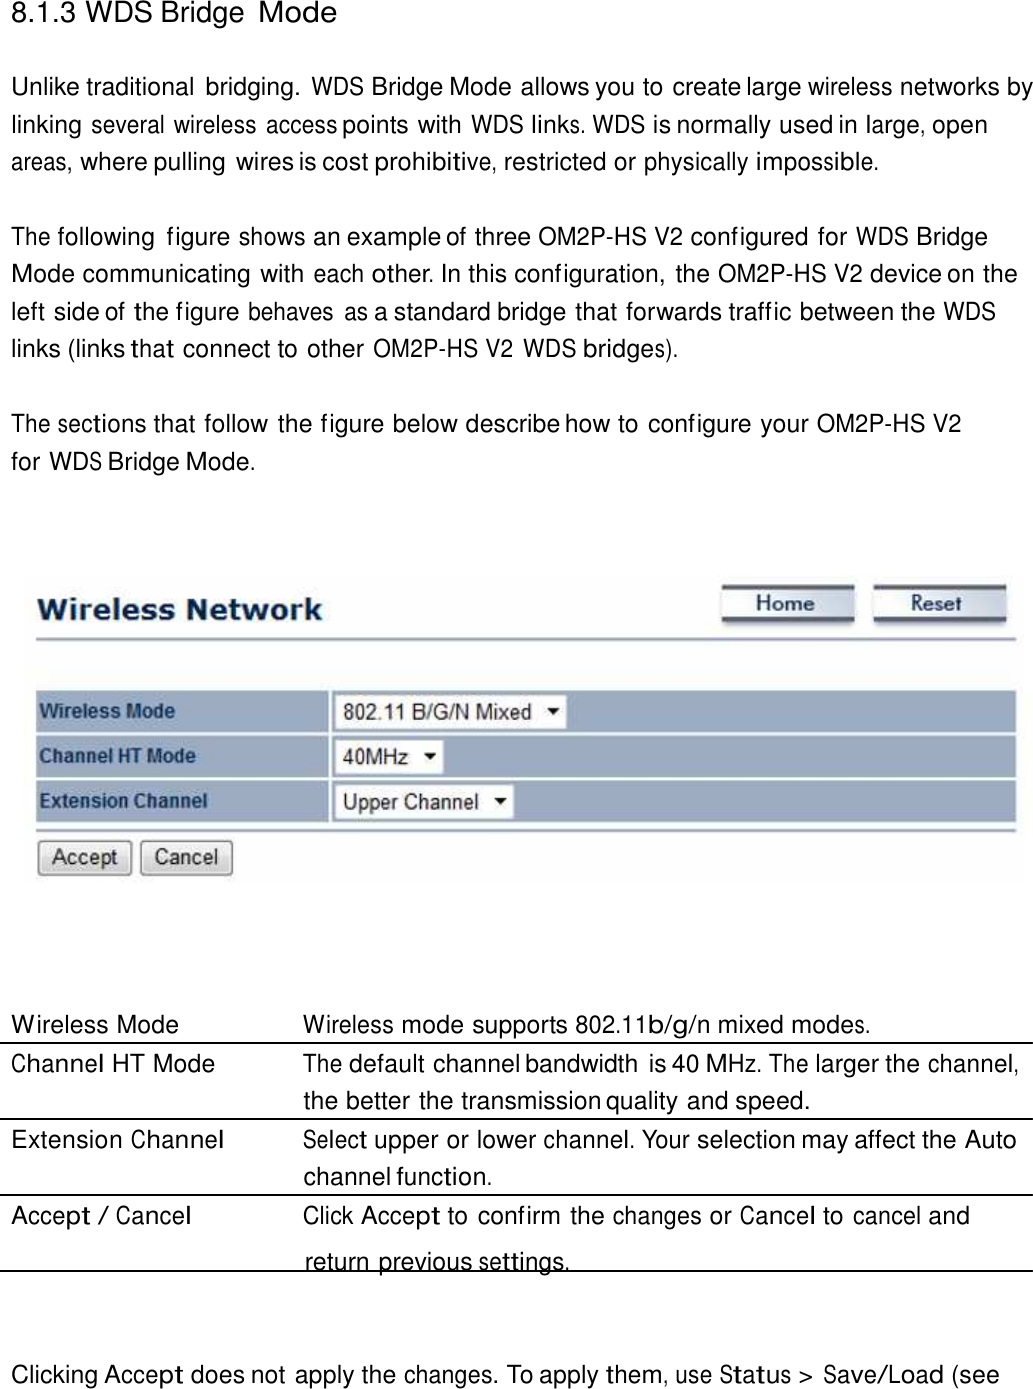  8.1.3 WDS Bridge Mode   Unlike traditional  bridging. WDS Bridge Mode allows you to create large wireless networks by linking several wireless access points with WDS links. WDS is normally used in large, open areas, where pulling wires is cost prohibitive, restricted or physically impossible.   The following  figure shows an example of three OM2P-HS V2 configured for WDS Bridge Mode communicating with each other. In this configuration, the OM2P-HS V2 device on the left side of the figure behaves  as a standard bridge that forwards traffic between the WDS links (links that connect to other OM2P-HS V2 WDS bridges).  The sections that follow the figure below describe how to configure your OM2P-HS V2 for WDS Bridge Mode.                           Wireless Mode  Wireless mode supports 802.11b/g/n mixed modes. Channel HT Mode  The default channel bandwidth is 40 MHz. The larger the channel, the better the transmission quality and speed. Extension Channel Select upper or lower channel. Your selection may affect the Auto channel function. Accept / Cancel Click Accept to confirm the changes or Cancel to cancel and return previous settings.     Clicking Accept does not apply the changes. To apply them, use Status &gt; Save/Load (see 